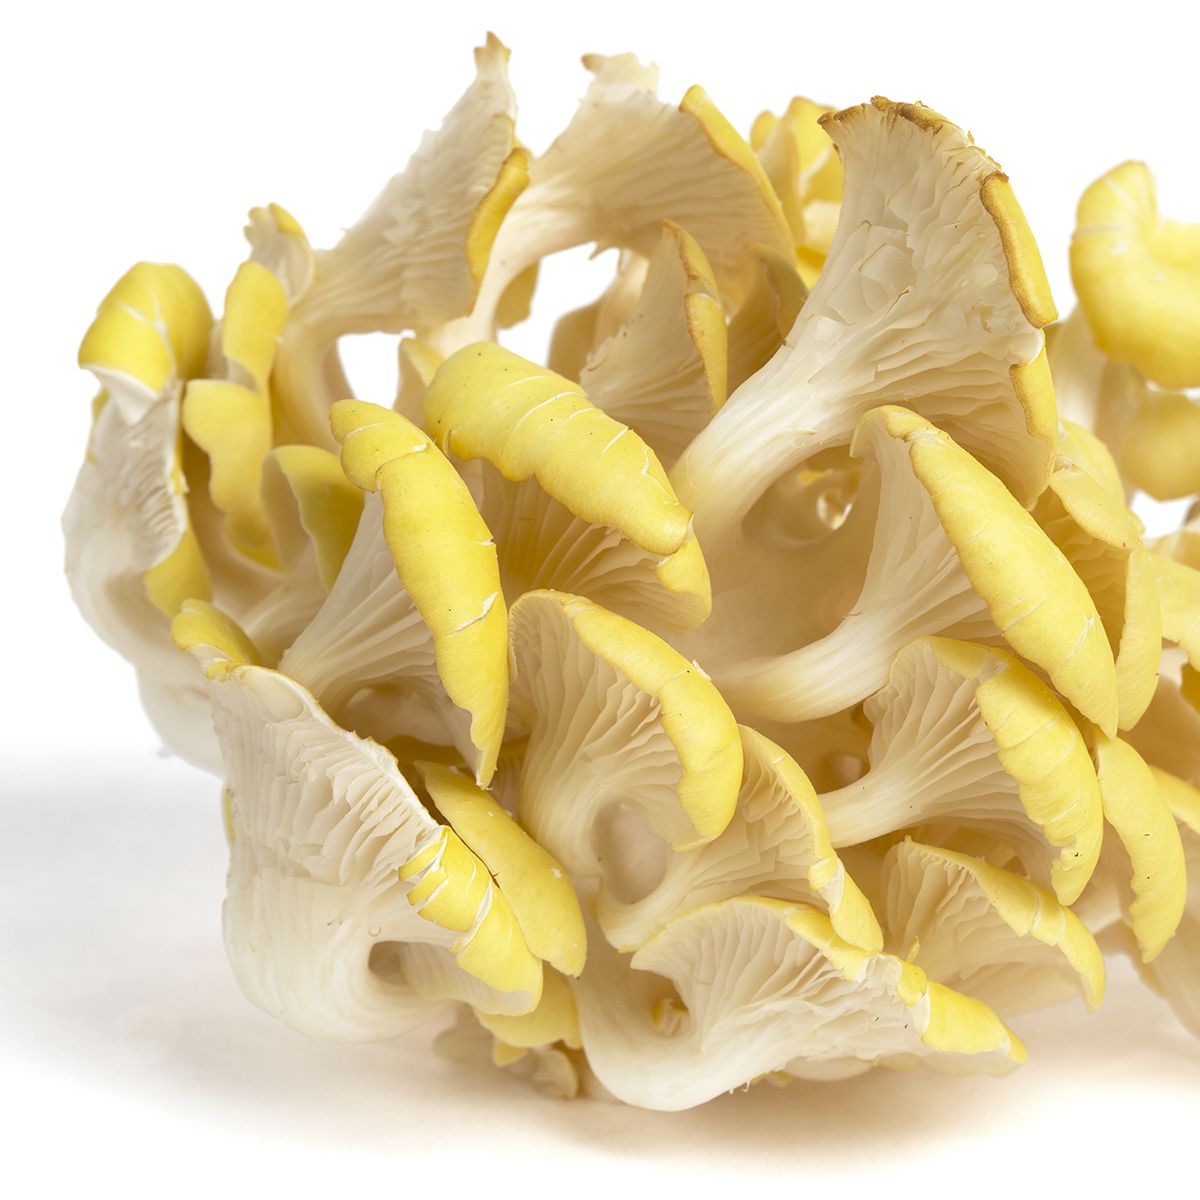 BoxNCase Yellow Oyster Mushrooms